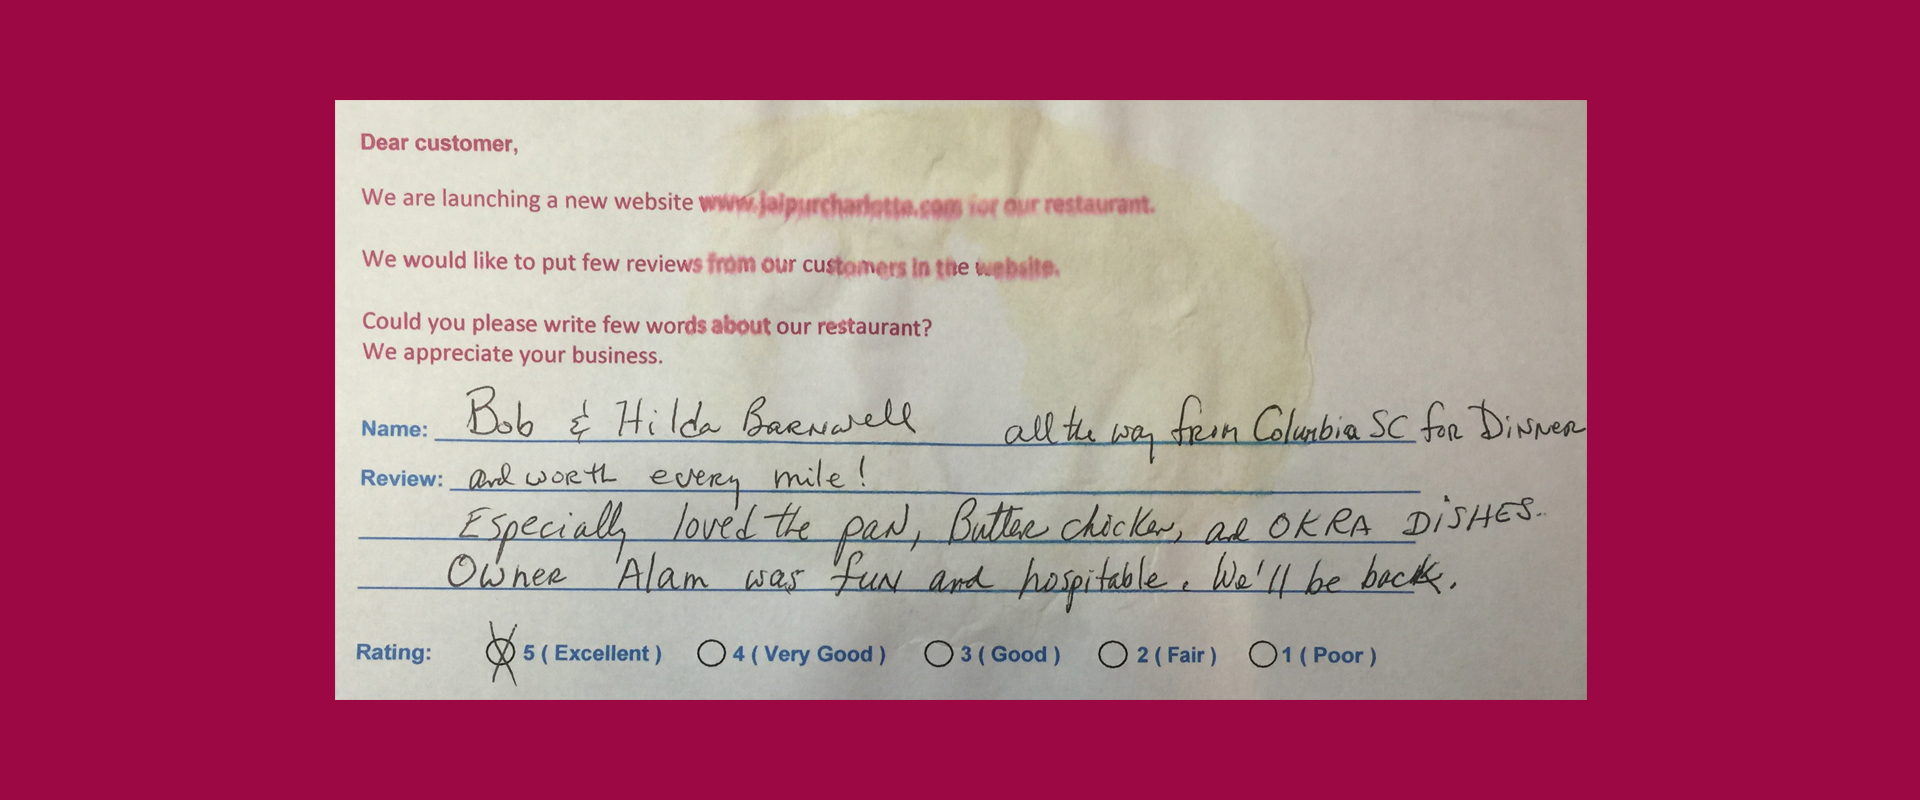 Jaipur Indian Restaurant Customer Review by Bob and Hilda Barnwell - Rating 5 out of 5